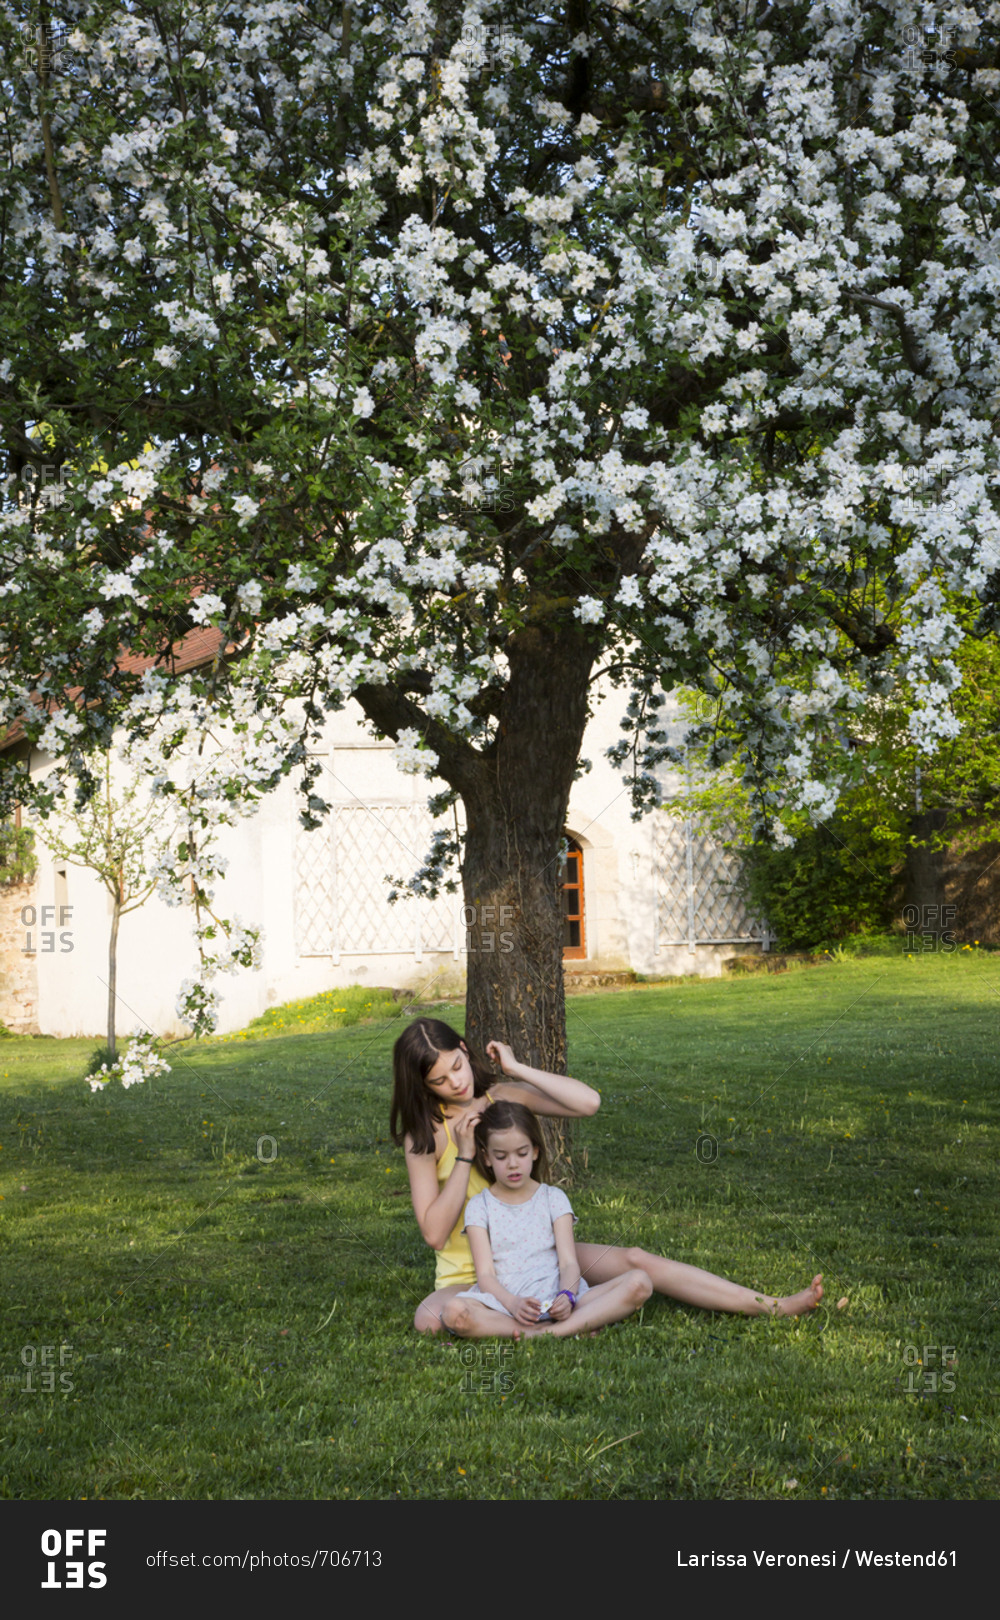 Two girls sitting in front of blossoming apple tree in the garden